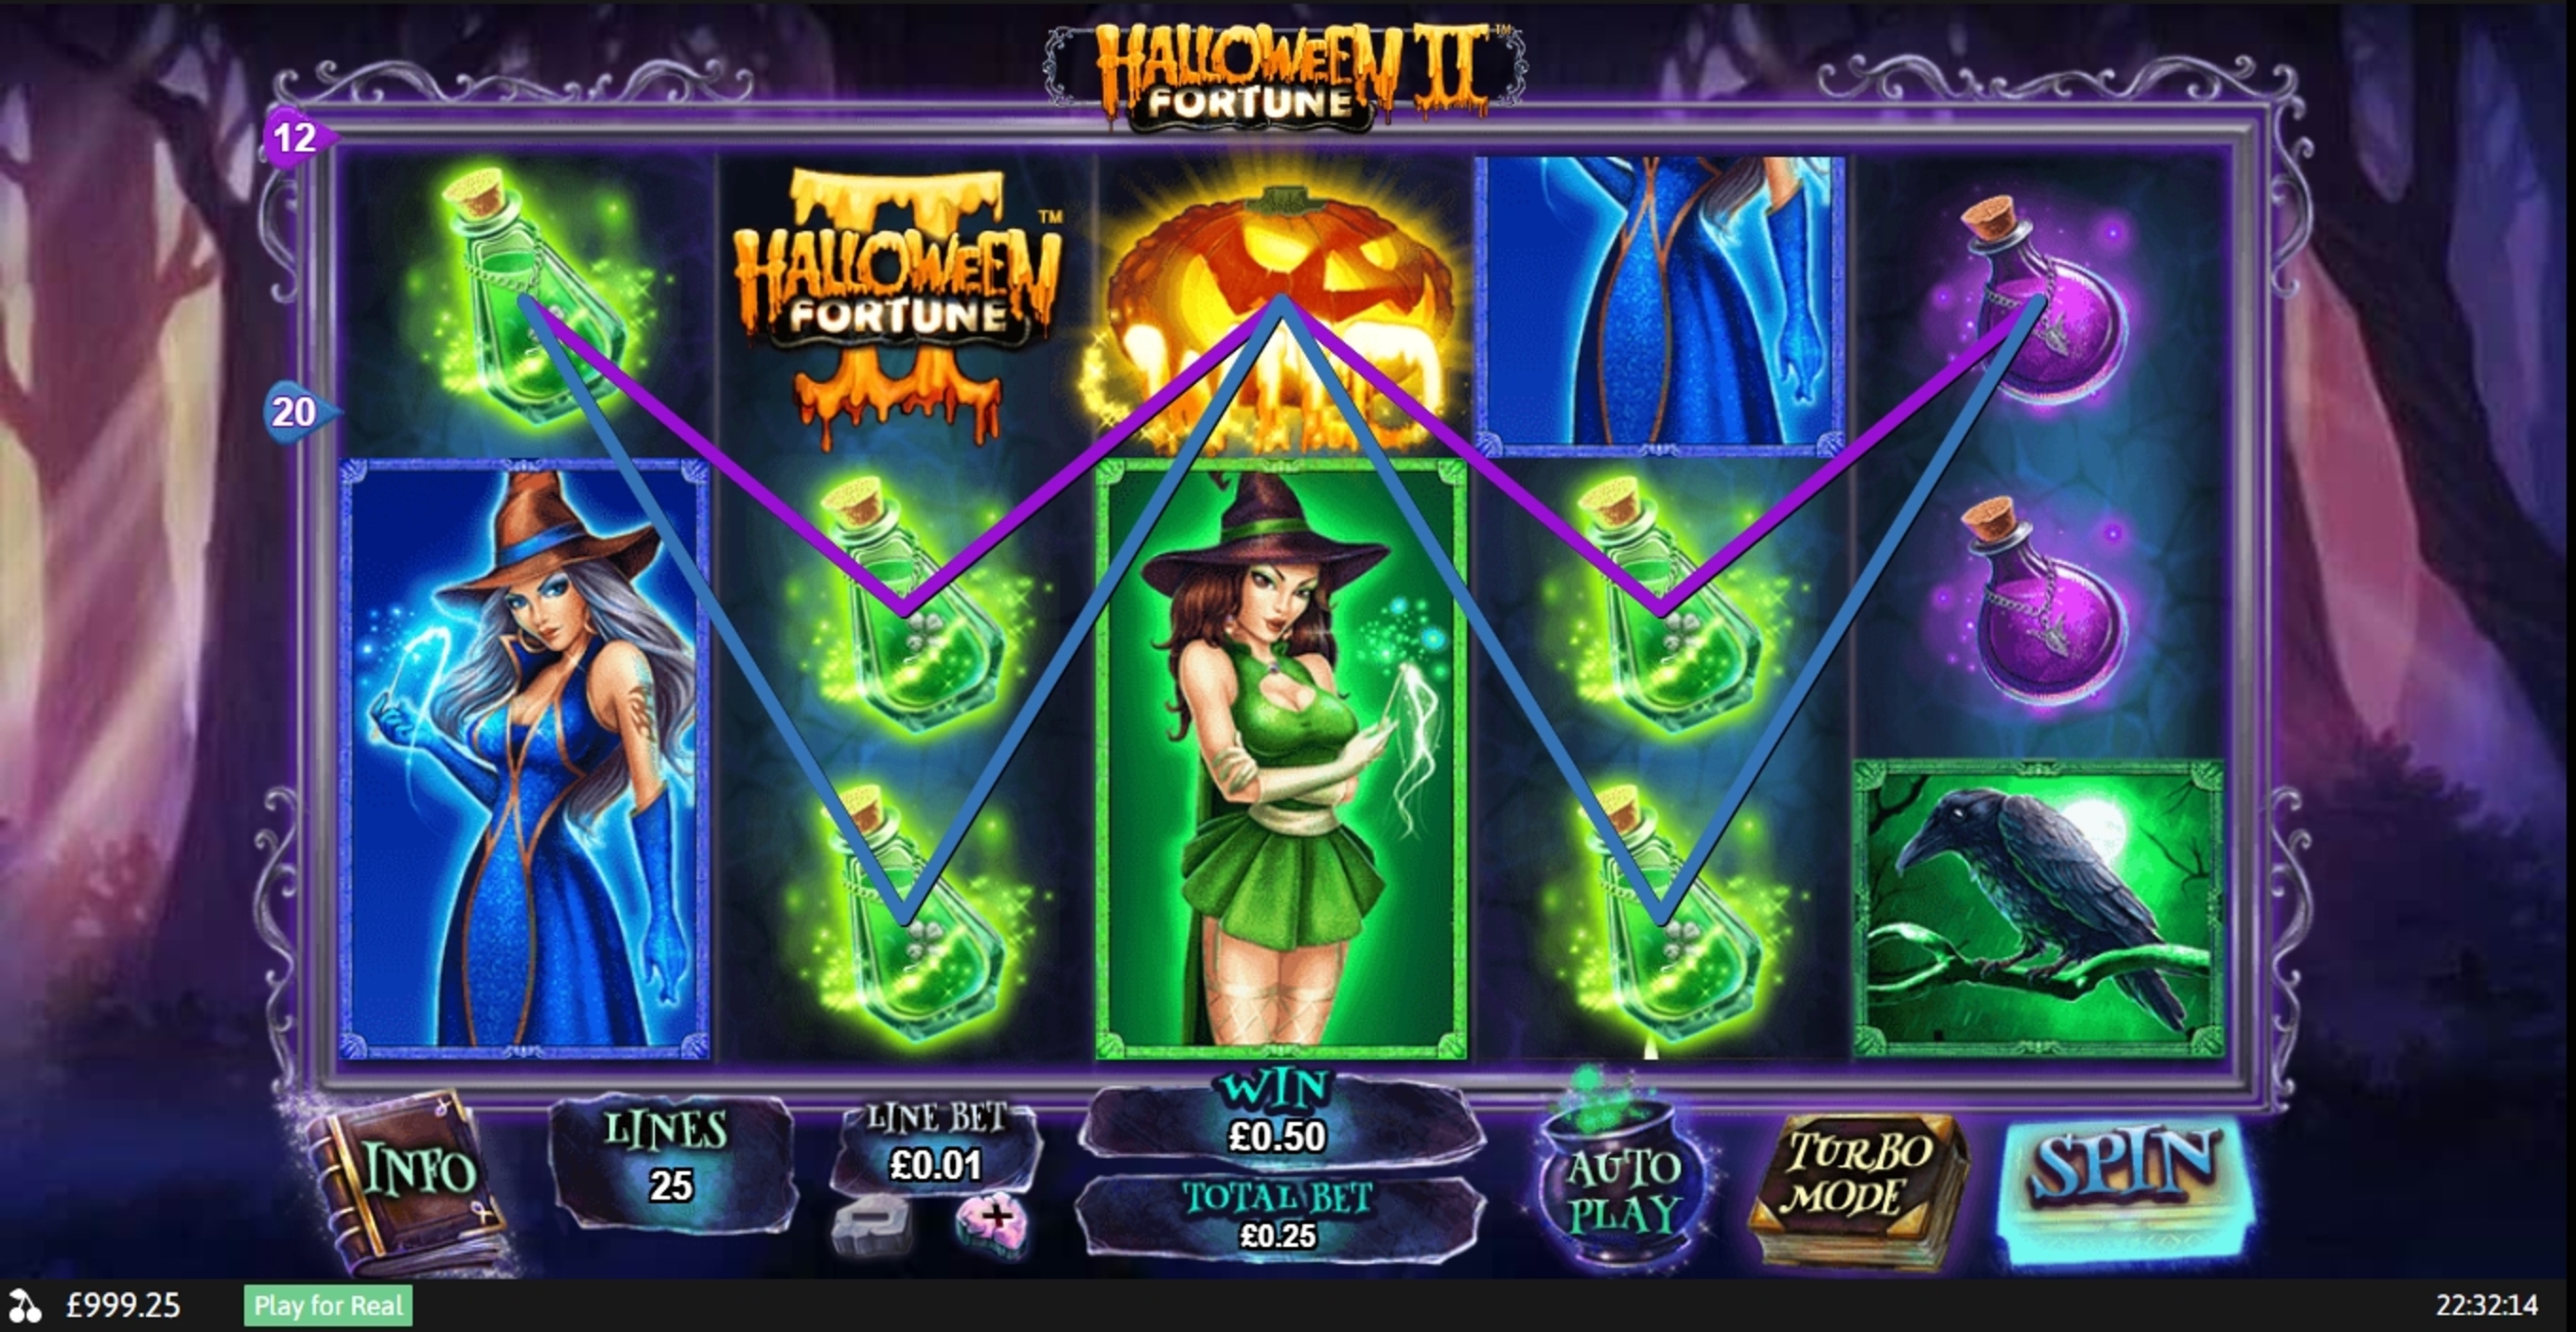 Win Money in Halloween Fortune II Free Slot Game by Playtech